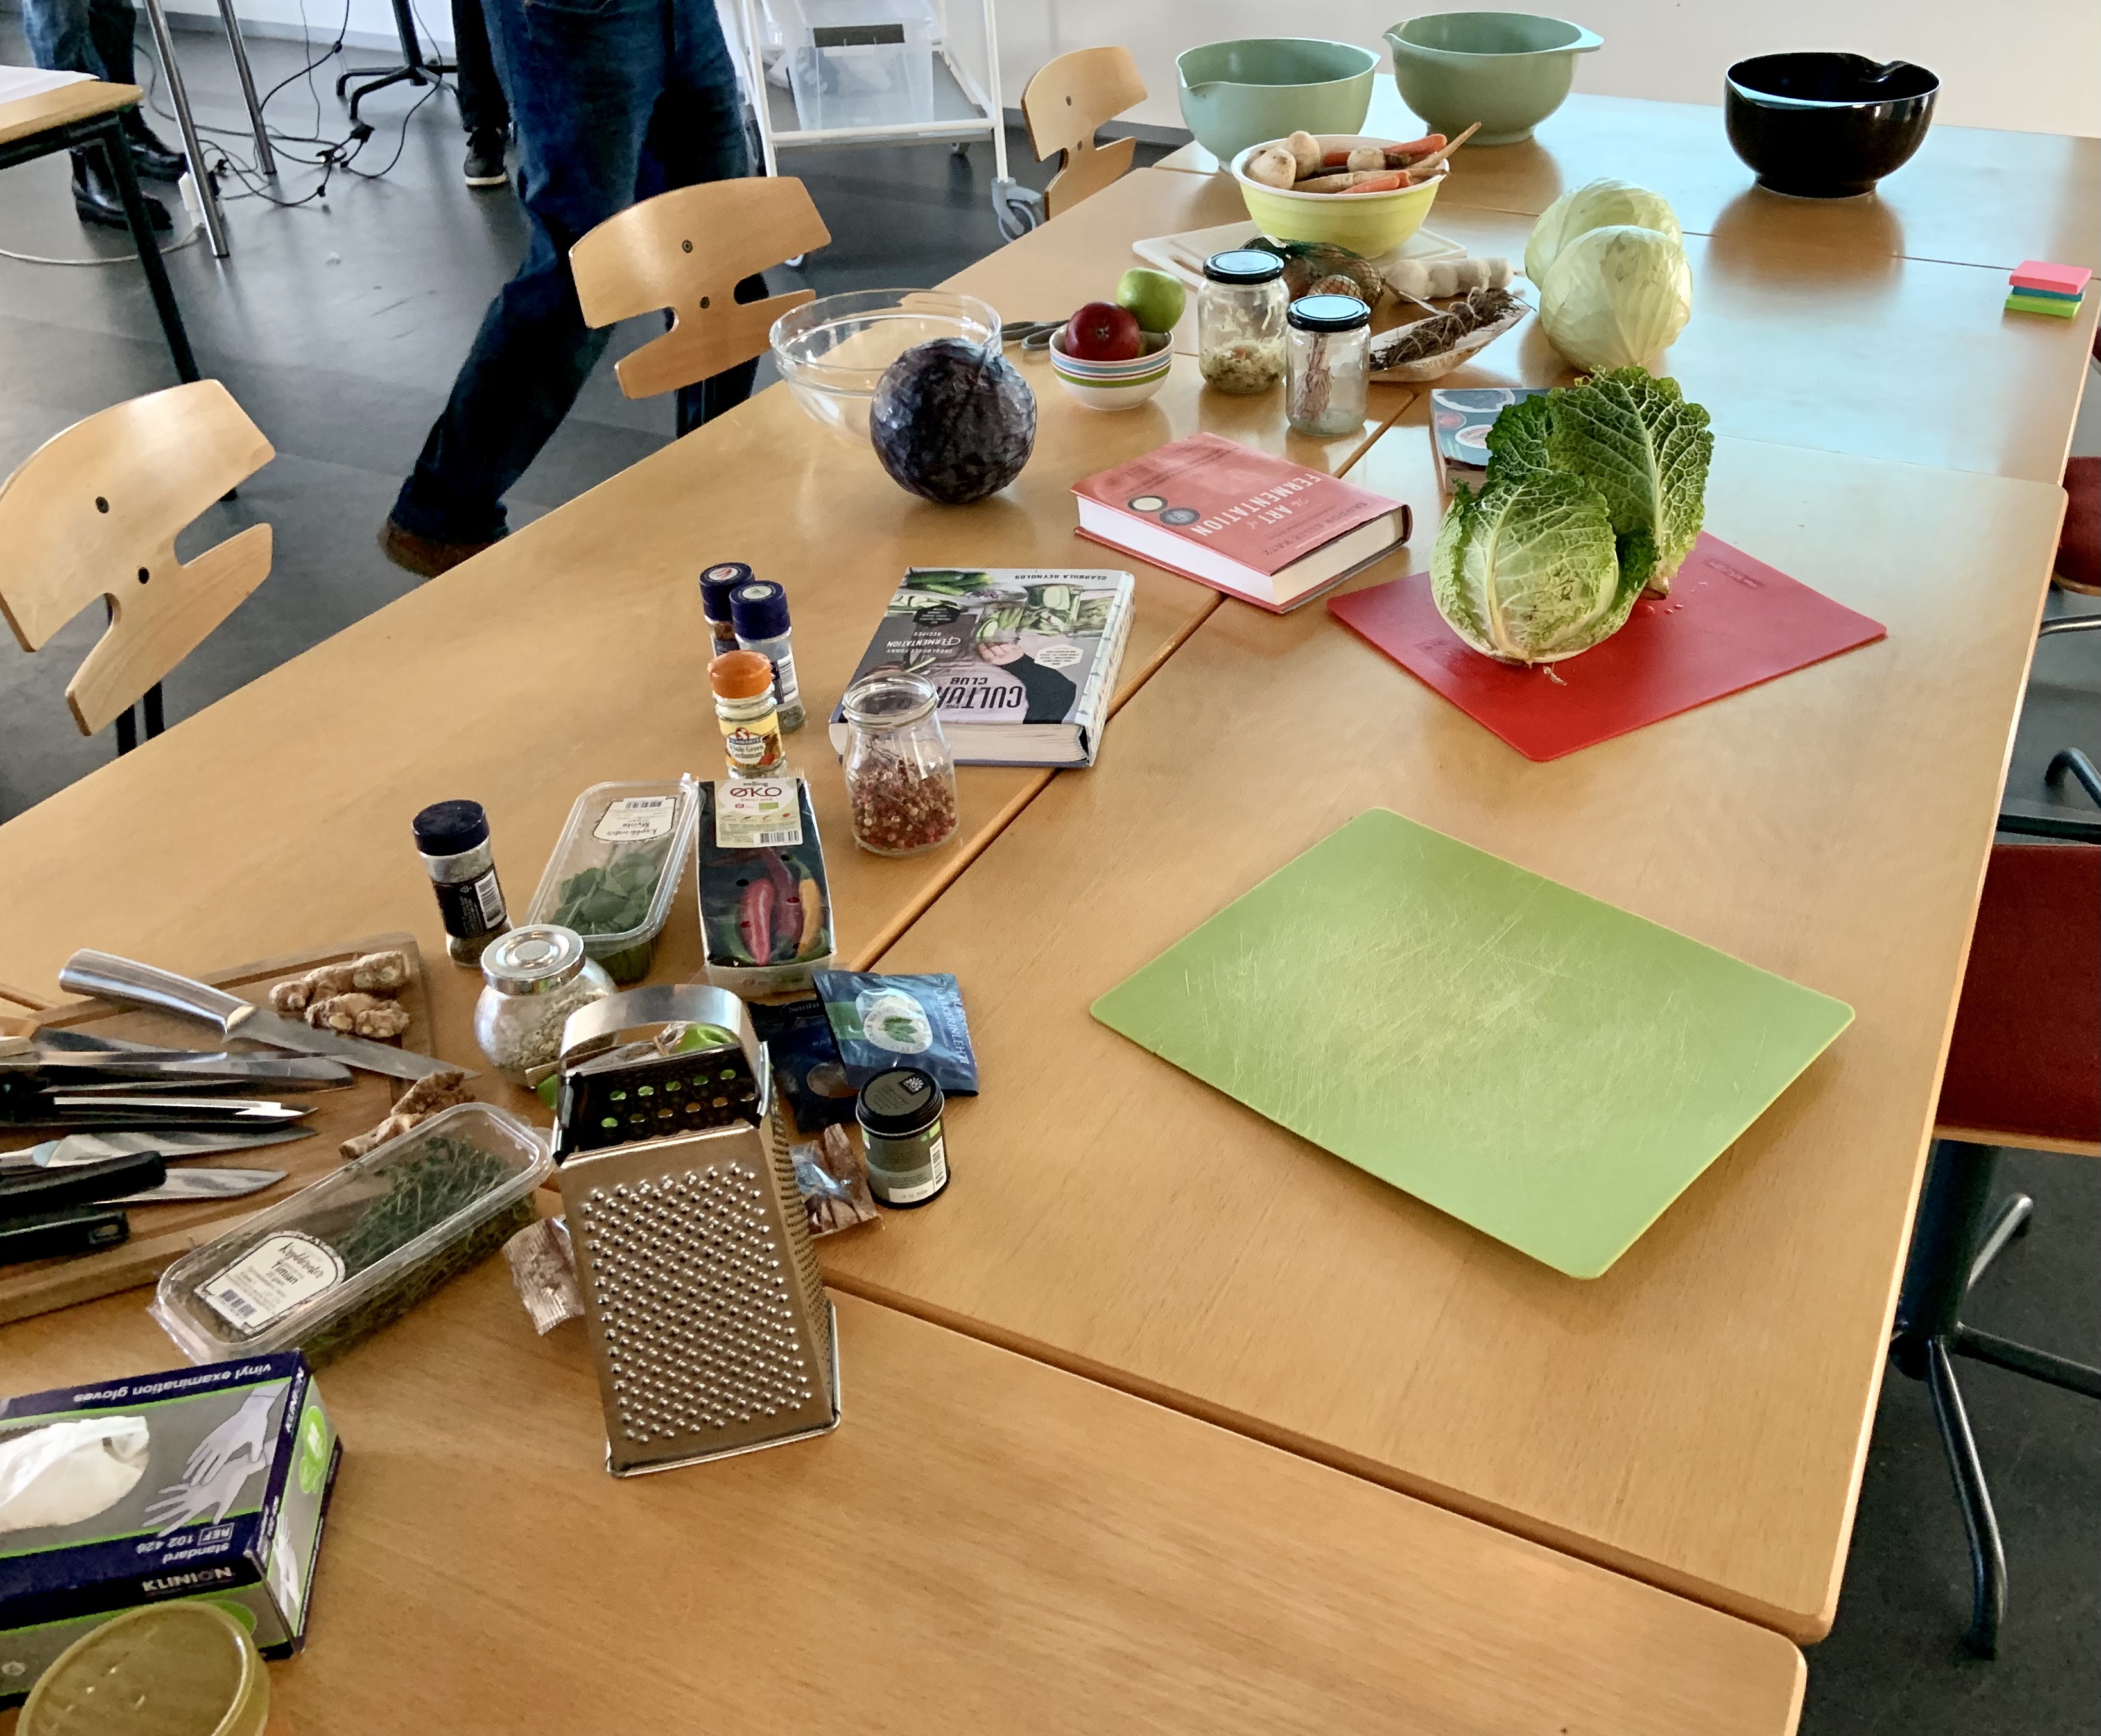 A set of connected tables containing stashes of ingredients and tools for fermenting: vegetables and spices, cookbooks, knives, cuttingboards and a grater.